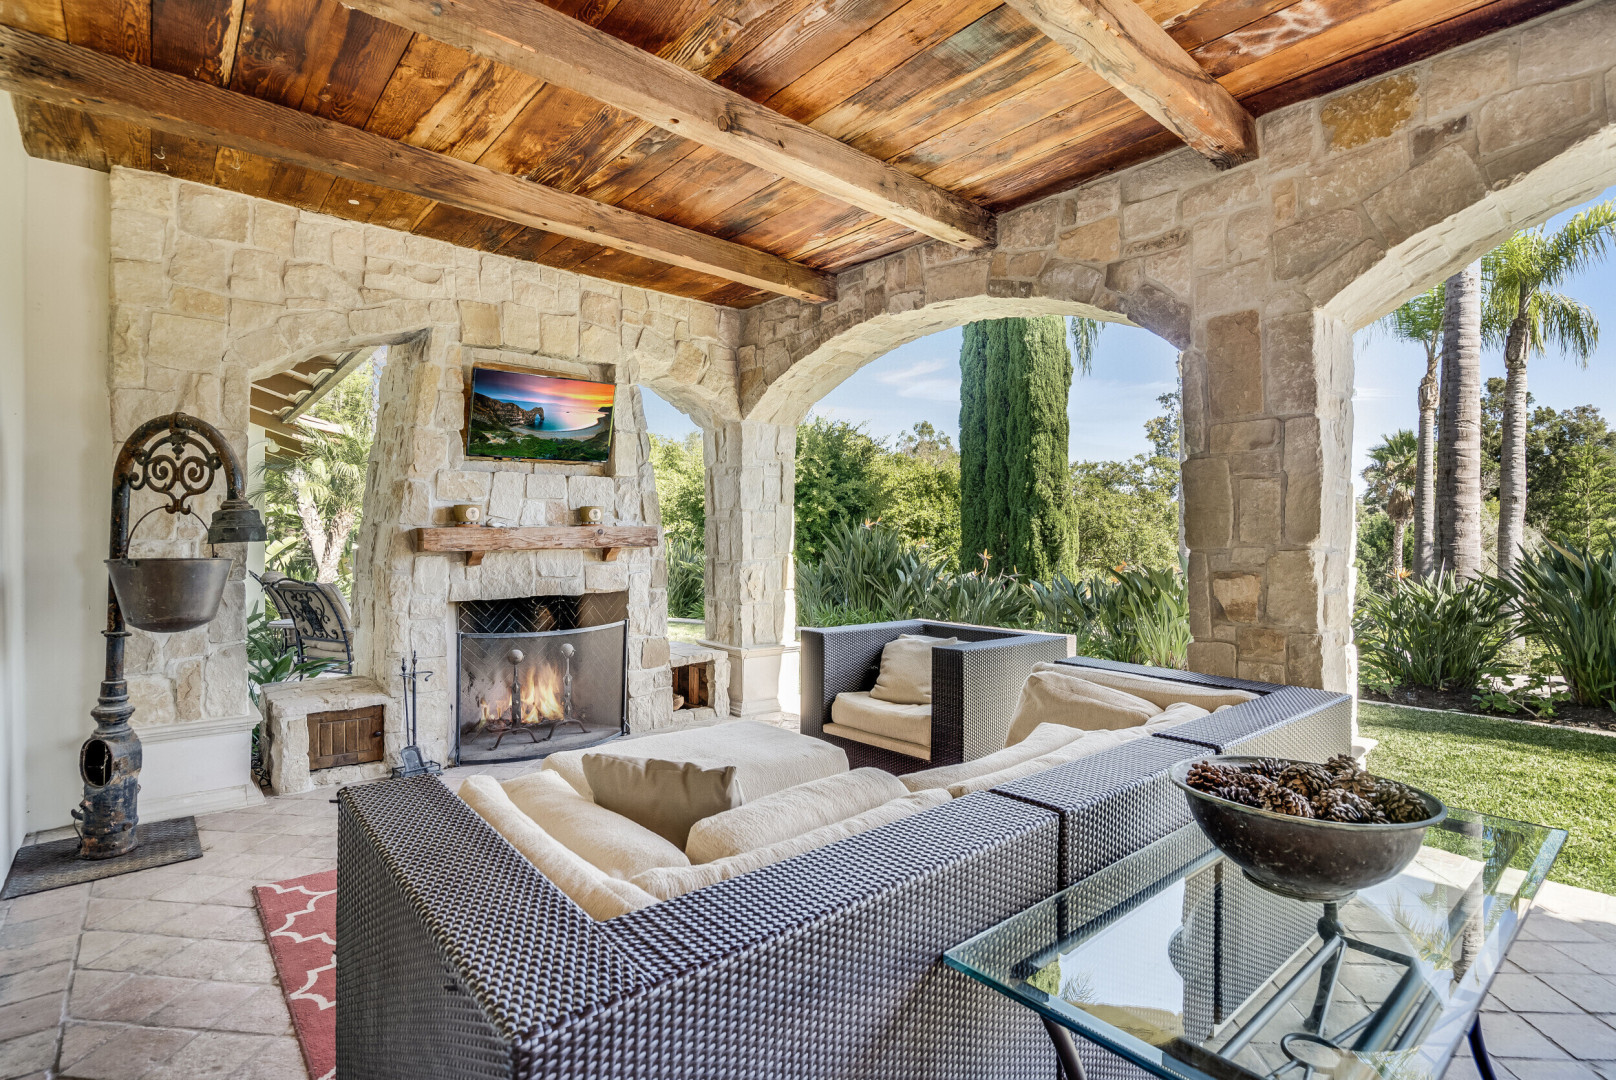 Luxury home boasting a beautiful outdoor living space made of wood and stone, Rancho Santa Fe CA